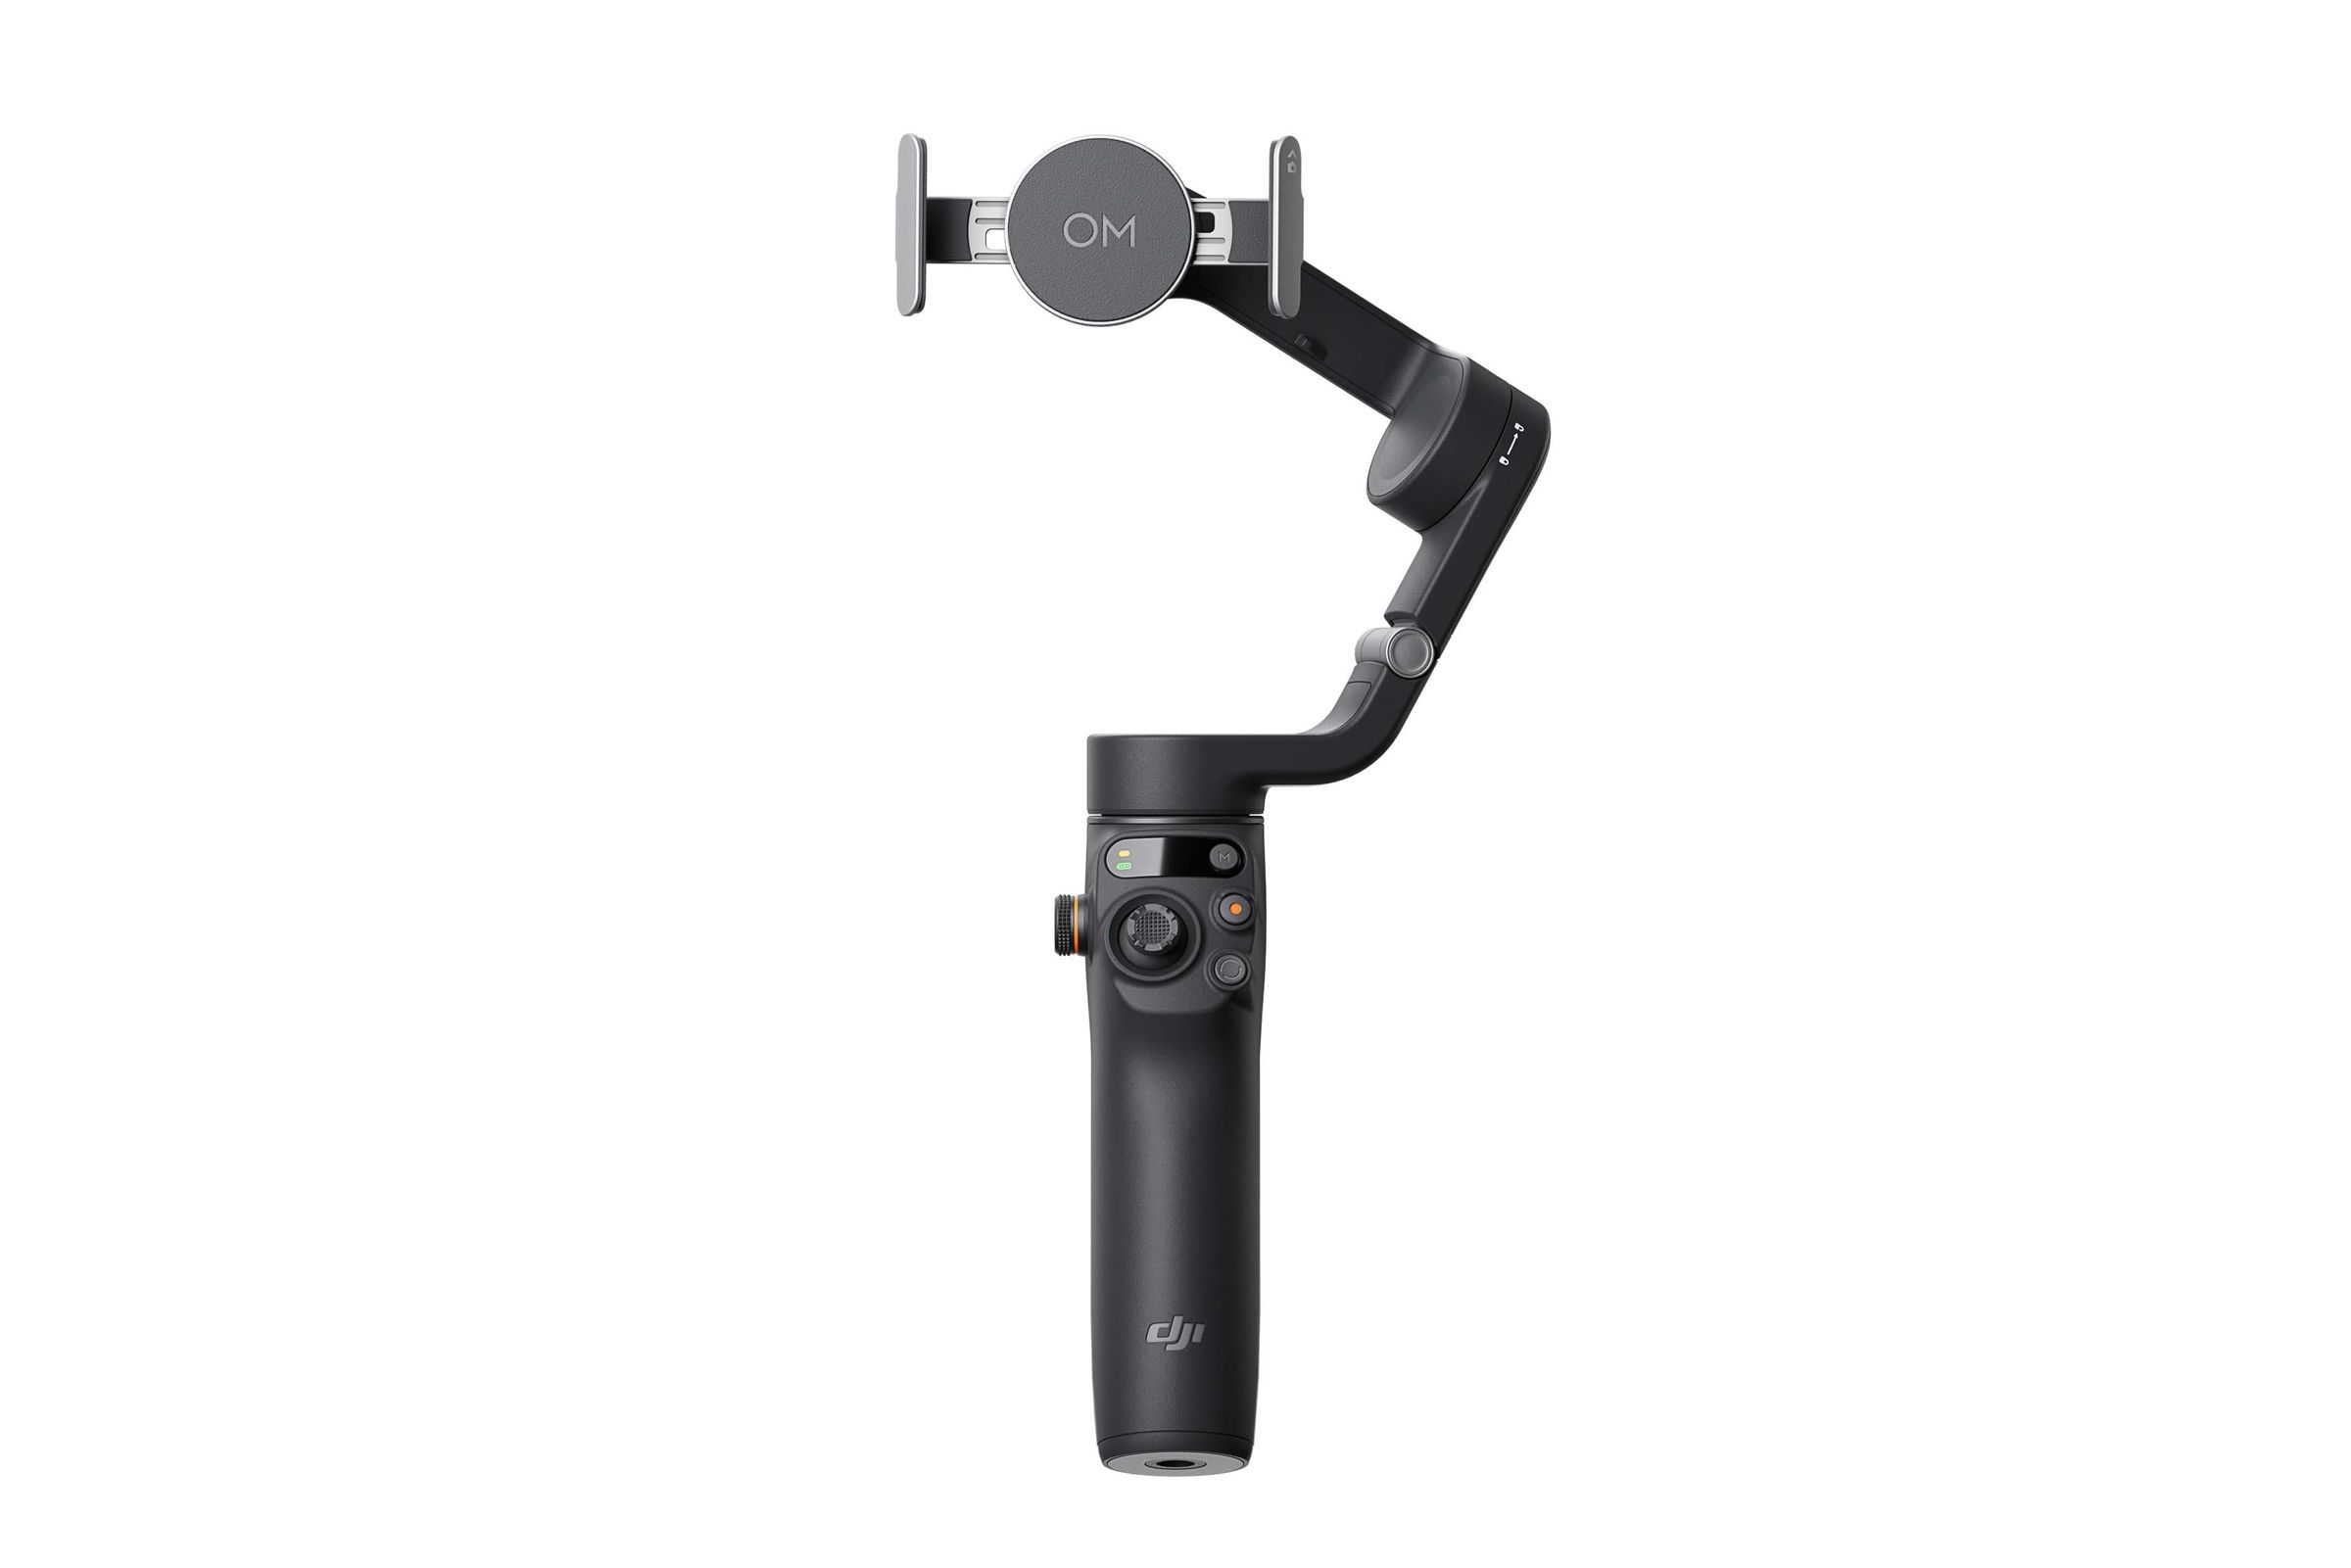 DJI Osmo Mobile 6 from the front.